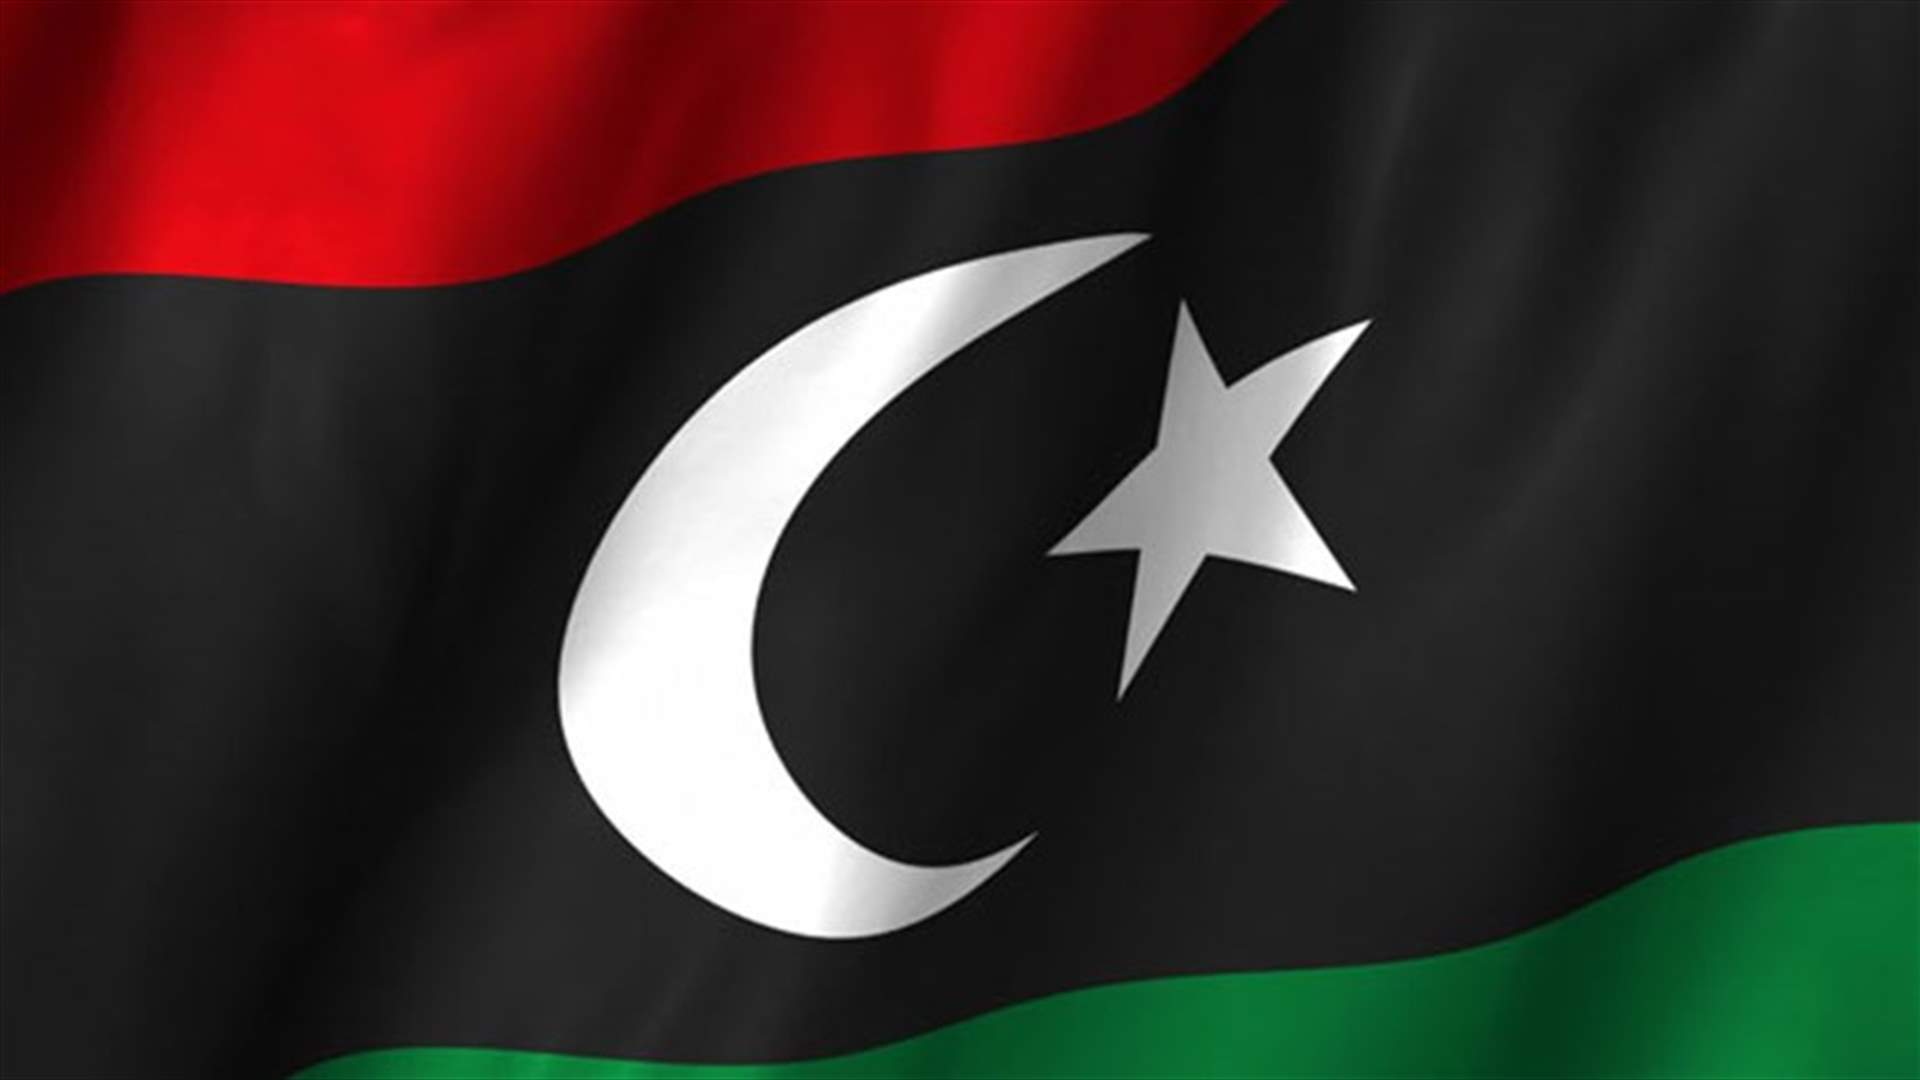 Staff evacuated from shuttered Libyan oil fields due to militant threat